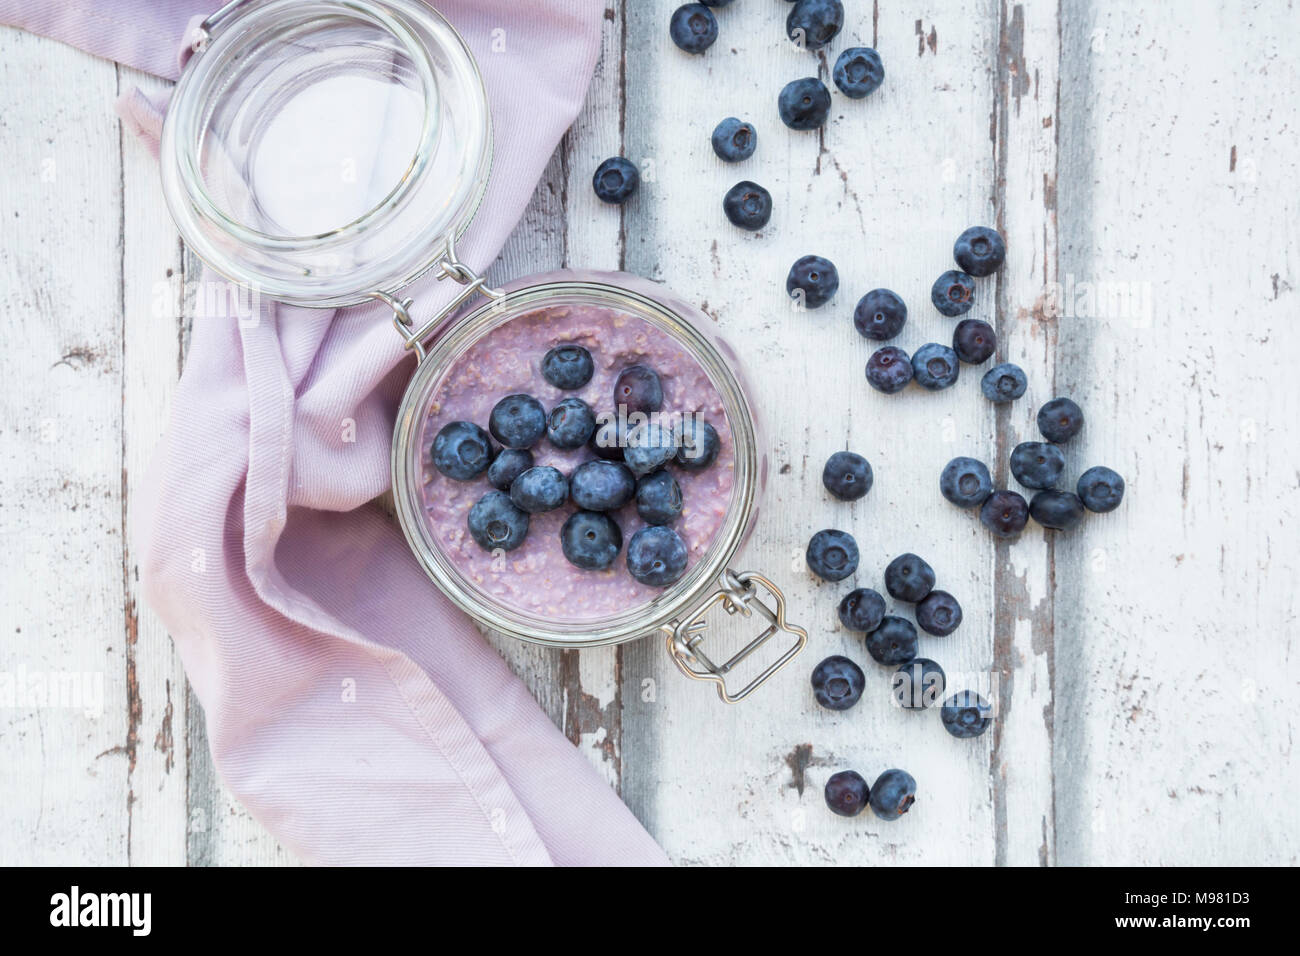 Overnight oats  with blueberries in jar Stock Photo